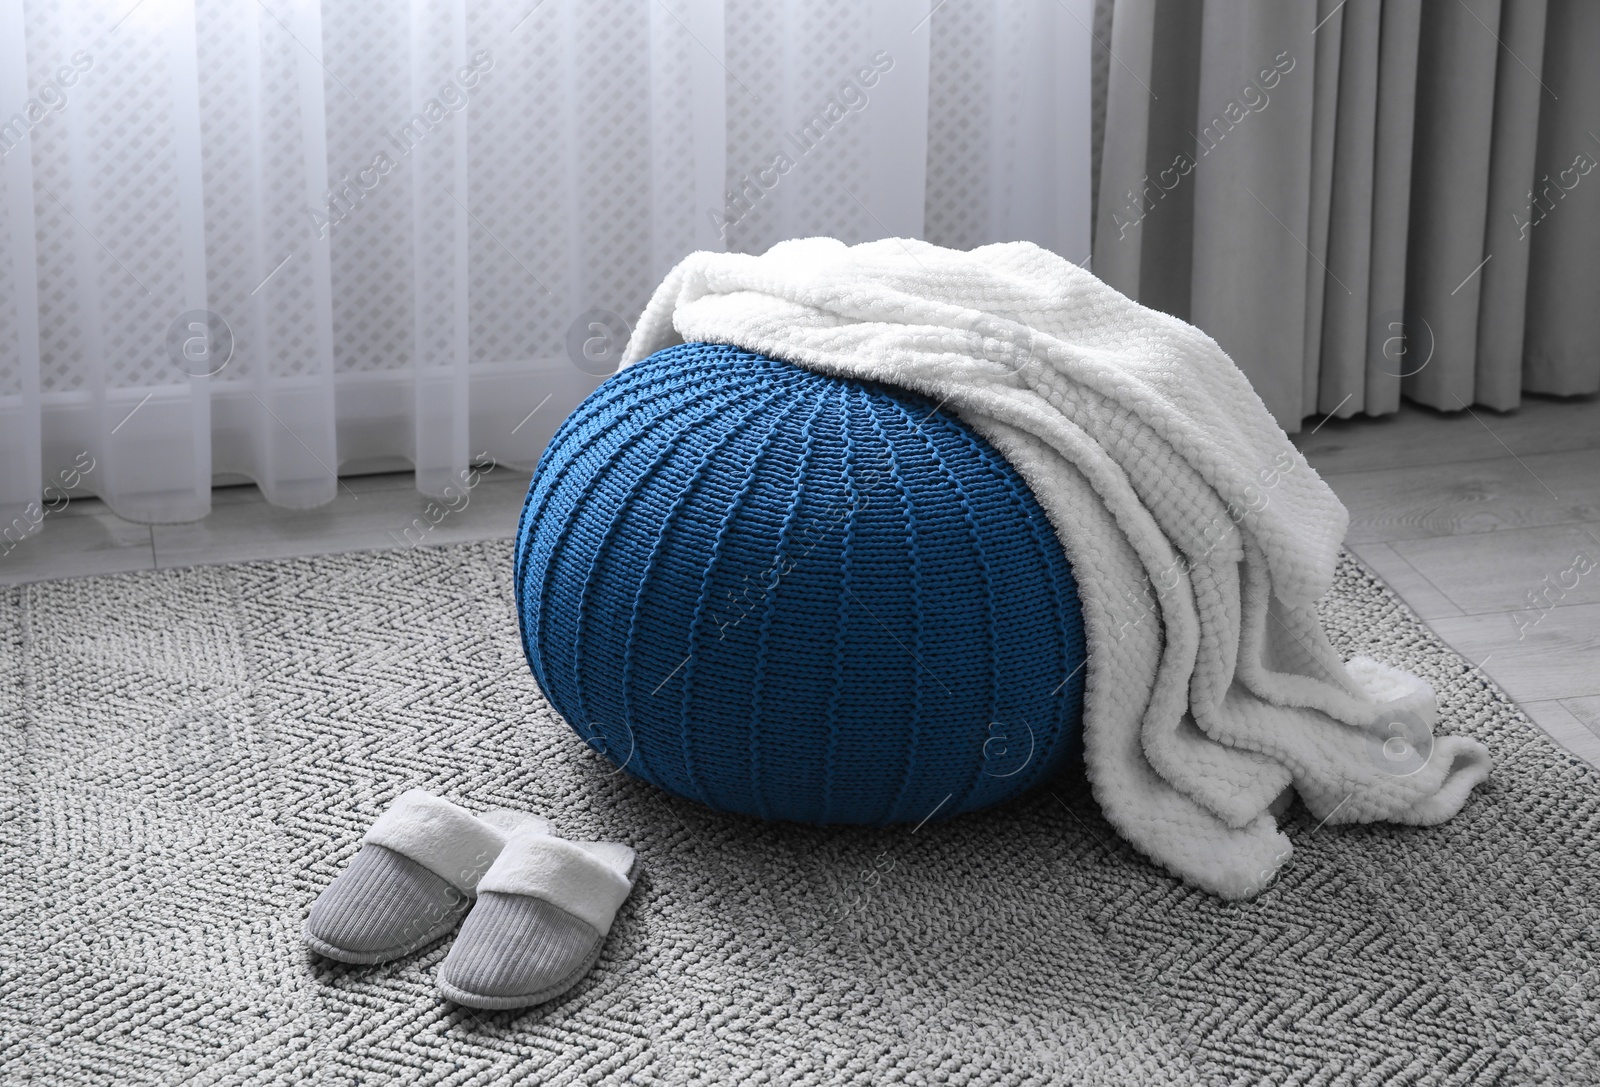 Photo of Soft blanket on blue pouf and slippers in room